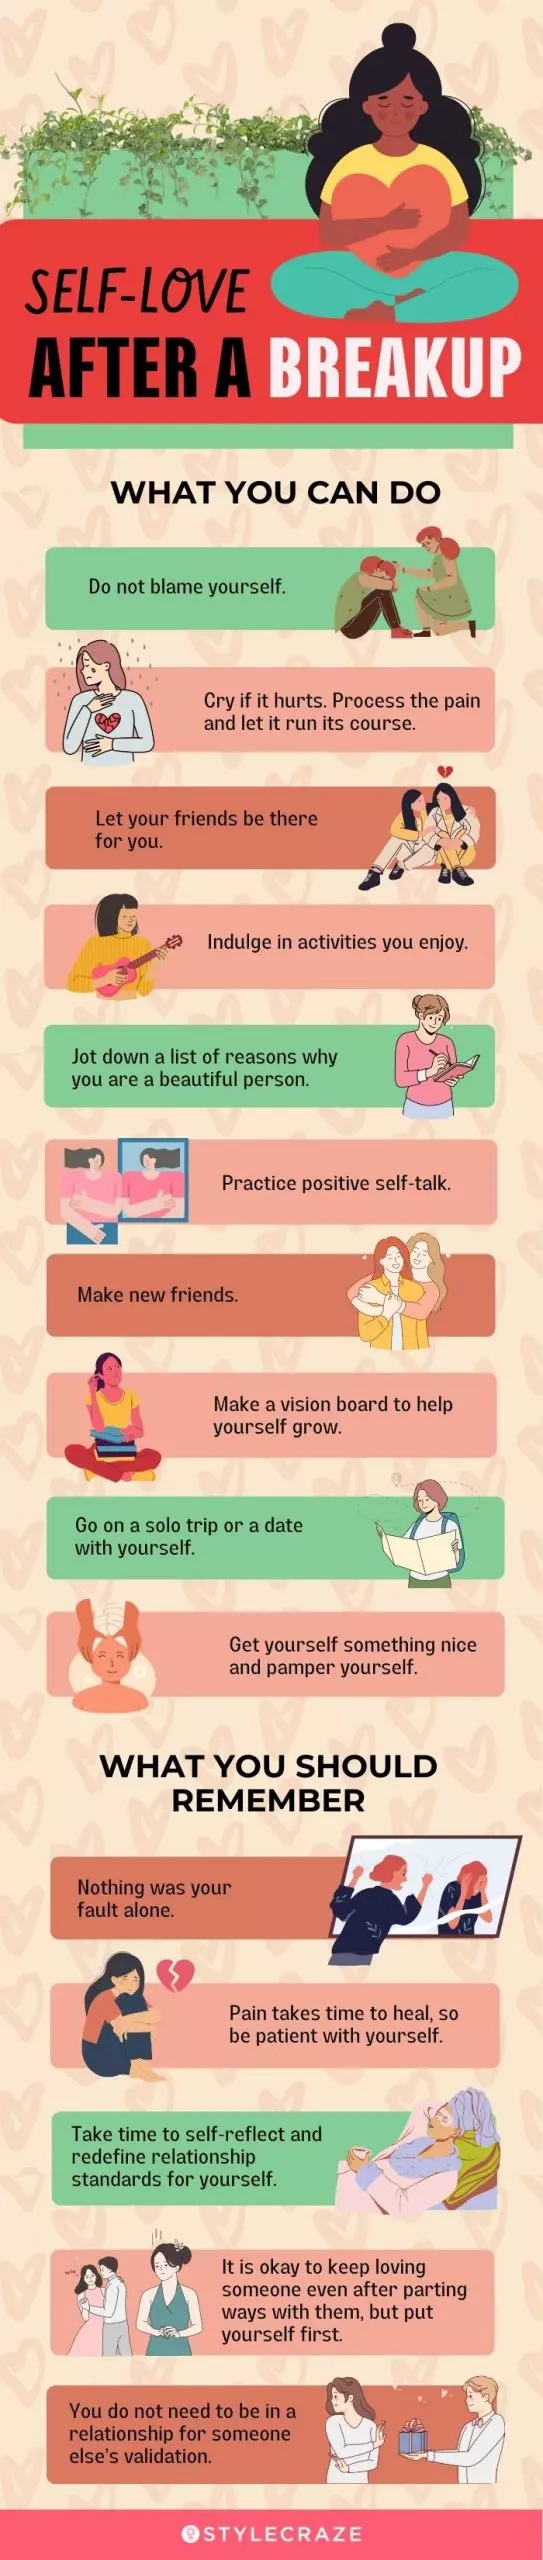 self-love after a breakup (infographic)